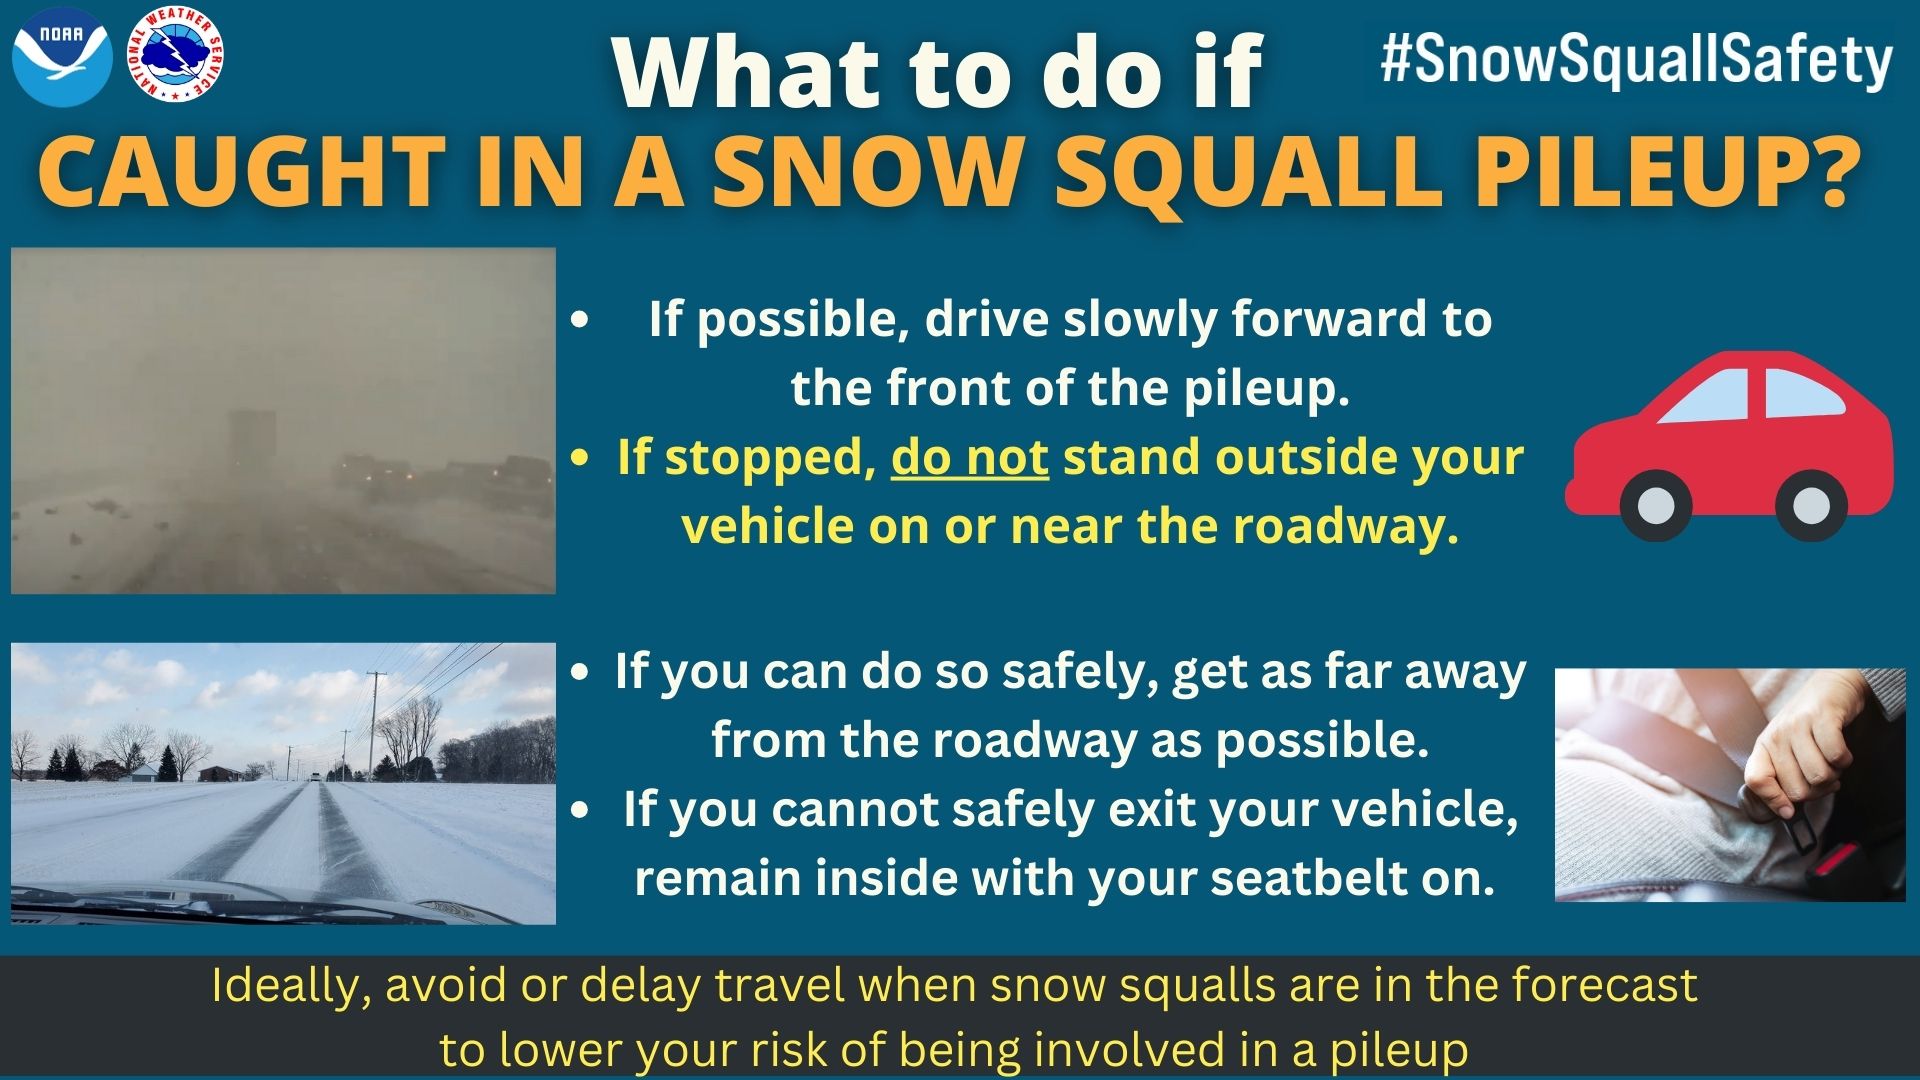 What to do if caught in a snow squall pileup? If possible, drive slowly forward to the front of the pileup. If stopped, do not stand outside your vehicle on or near the roadway. If you can do so safely, get as far away from the roadway as possible. If you cannot safely exit your vehicle, remain inside with your seatbelt on. Ideally, avoid or delay travel when snow squalls are in the forecast to lower your risk of being involved in a pileup.